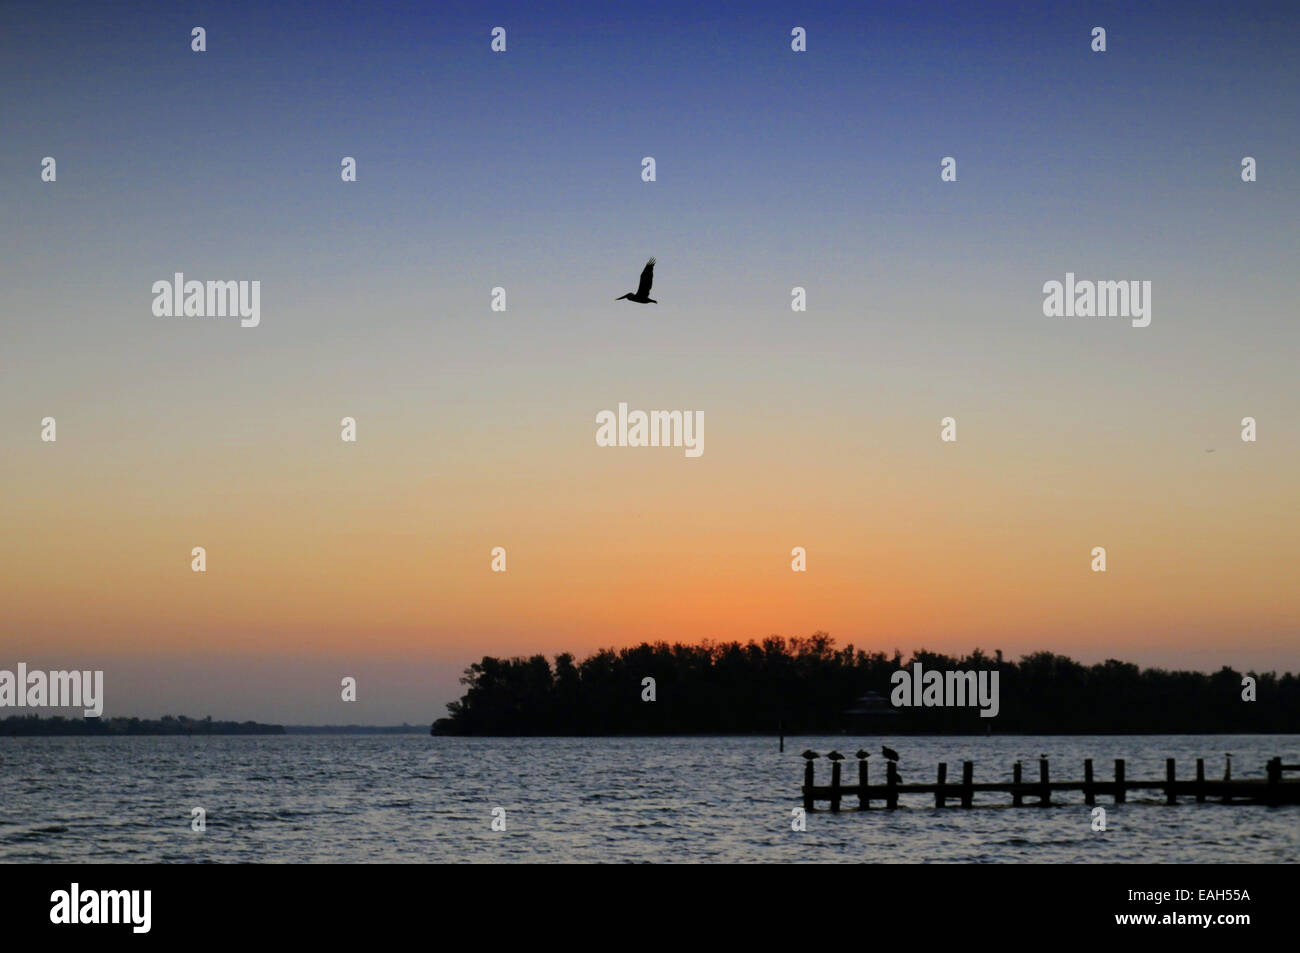 Bradenton, Florida, USA.15 November 2014.Scenes from South Coquina Boat Ramp during sunrise on a clear but much cooler day in the sunshine state. Stock Photo